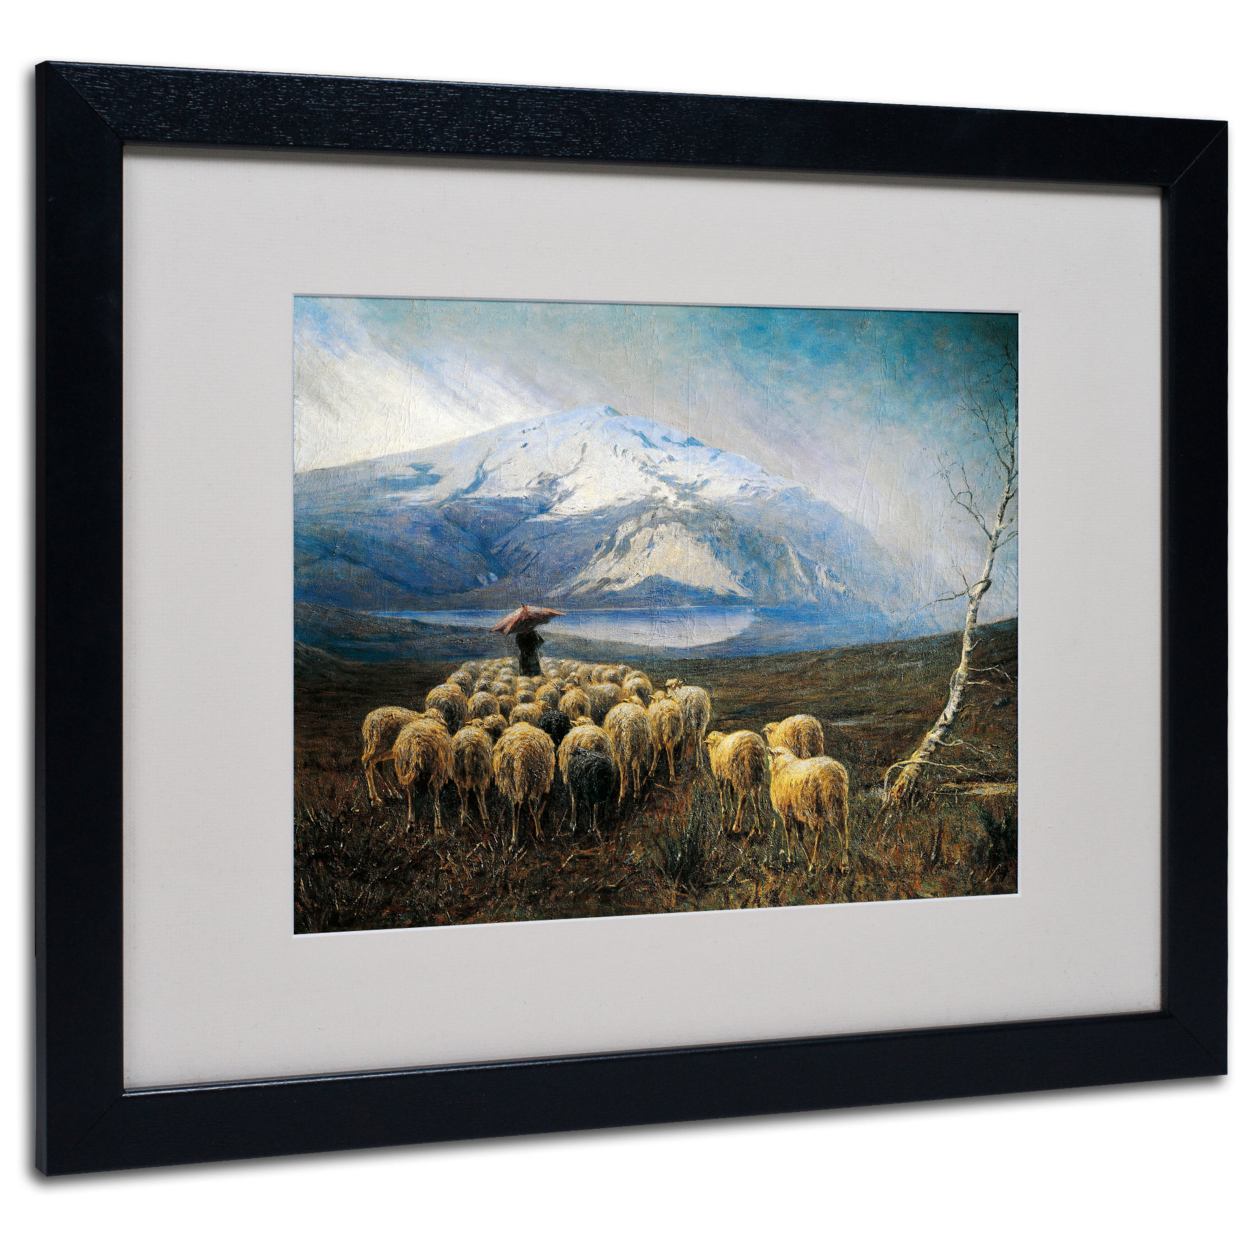 Achilles Tominetti 'Mountain Landscape' Black Wooden Framed Art 18 X 22 Inches